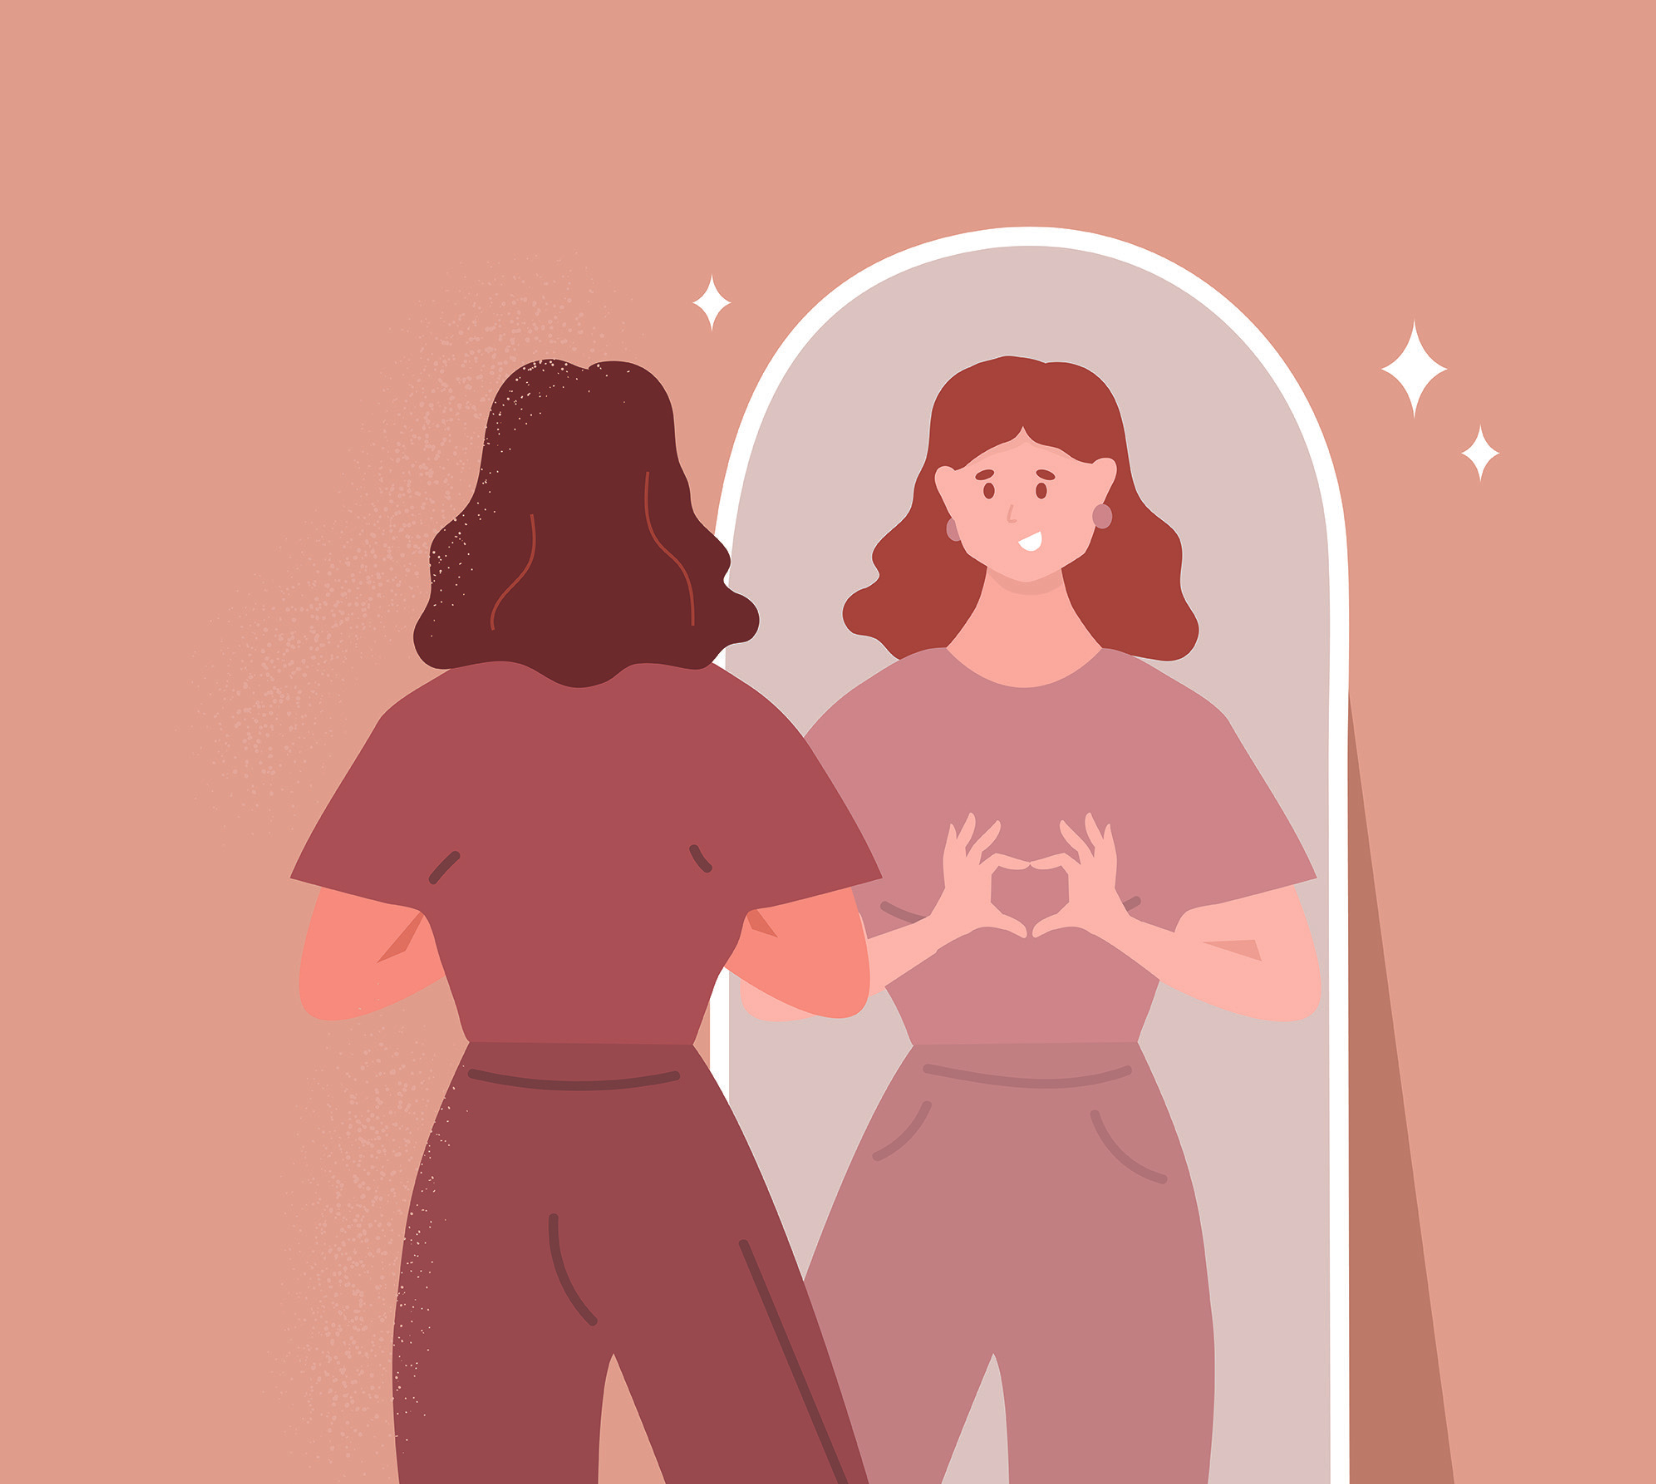 4 helpful steps to take during a bad body image day